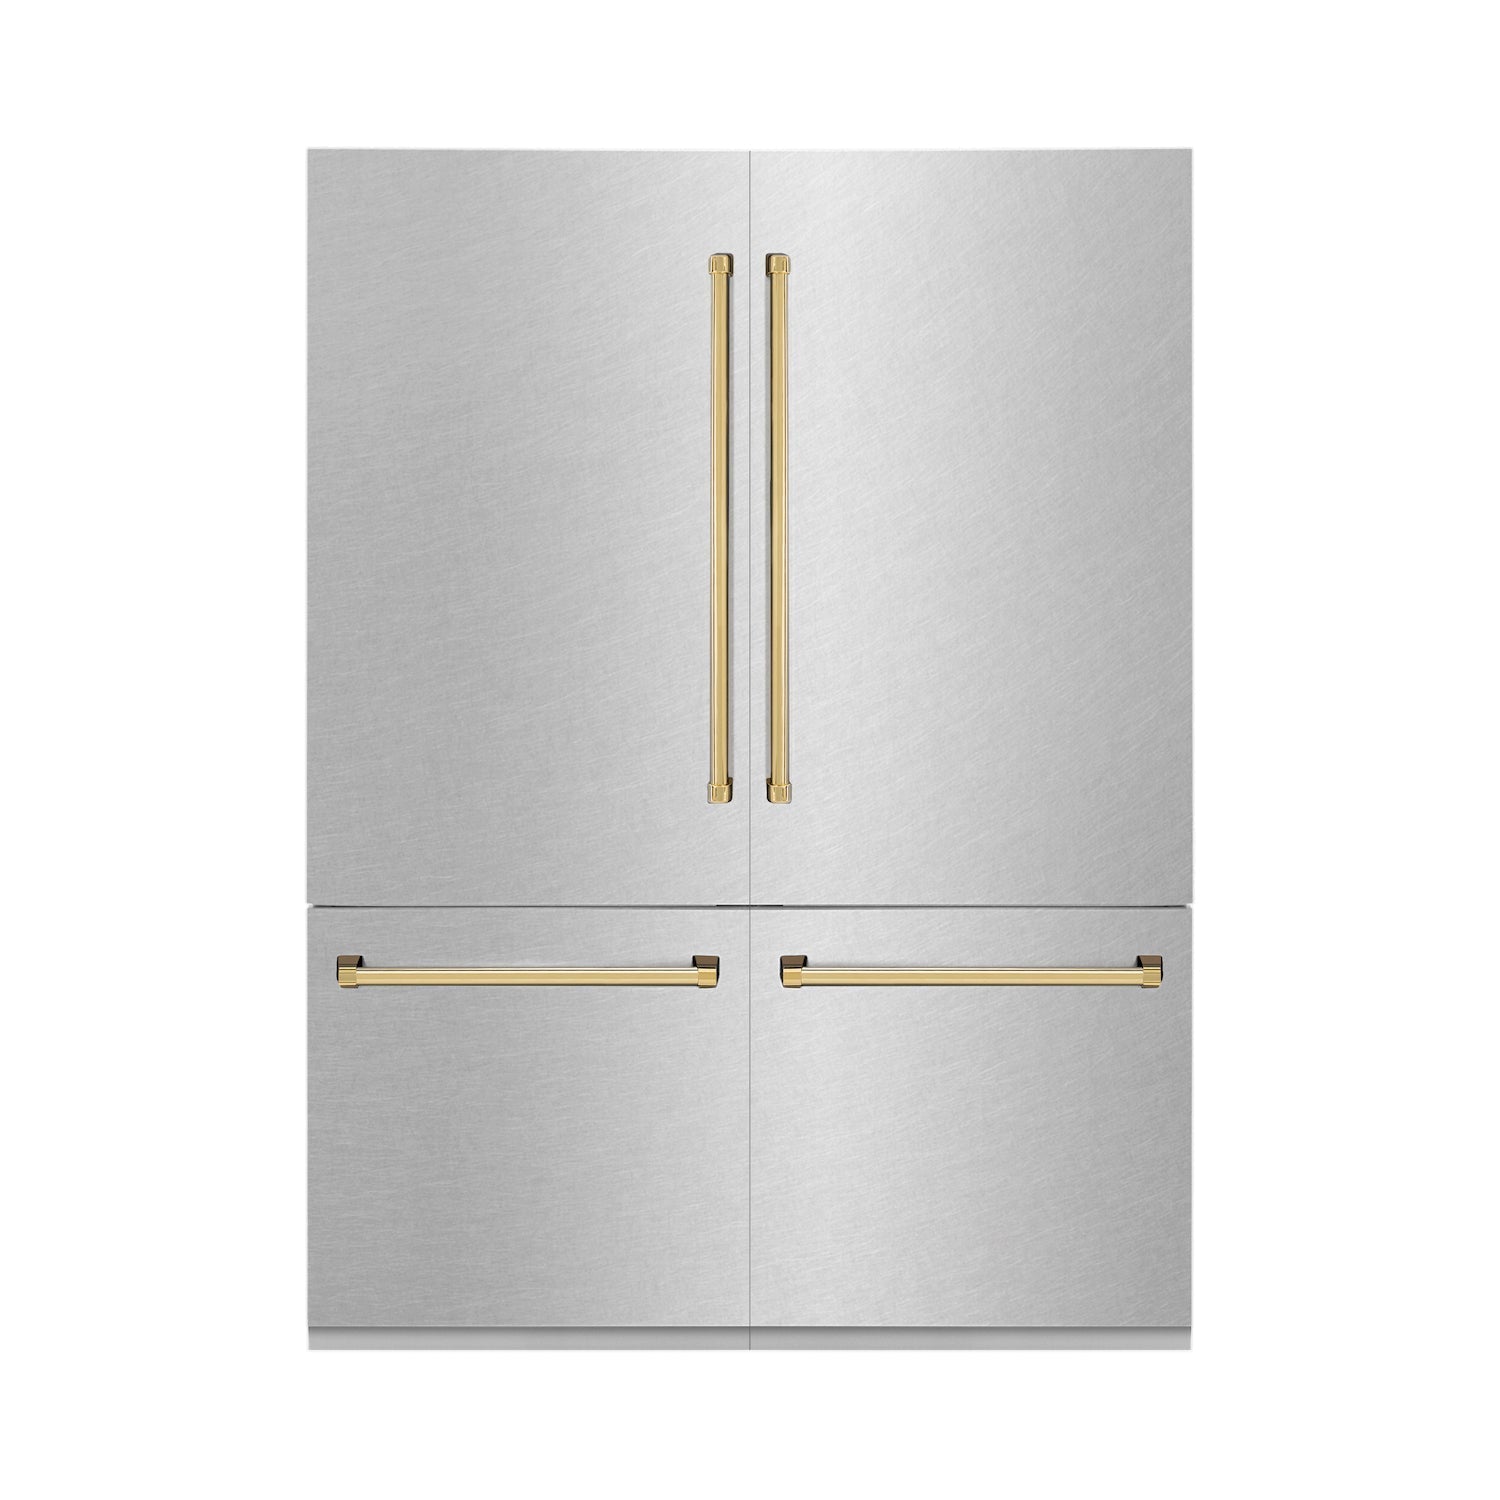 ZLINE 60" Autograph Edition 32.2 cu. ft. Built-in 4-Door French Door Refrigerator with Internal Water and Ice Dispenser in Fingerprint Resistant Stainless Steel with Gold Accents (RBIVZ-SN-60-G)